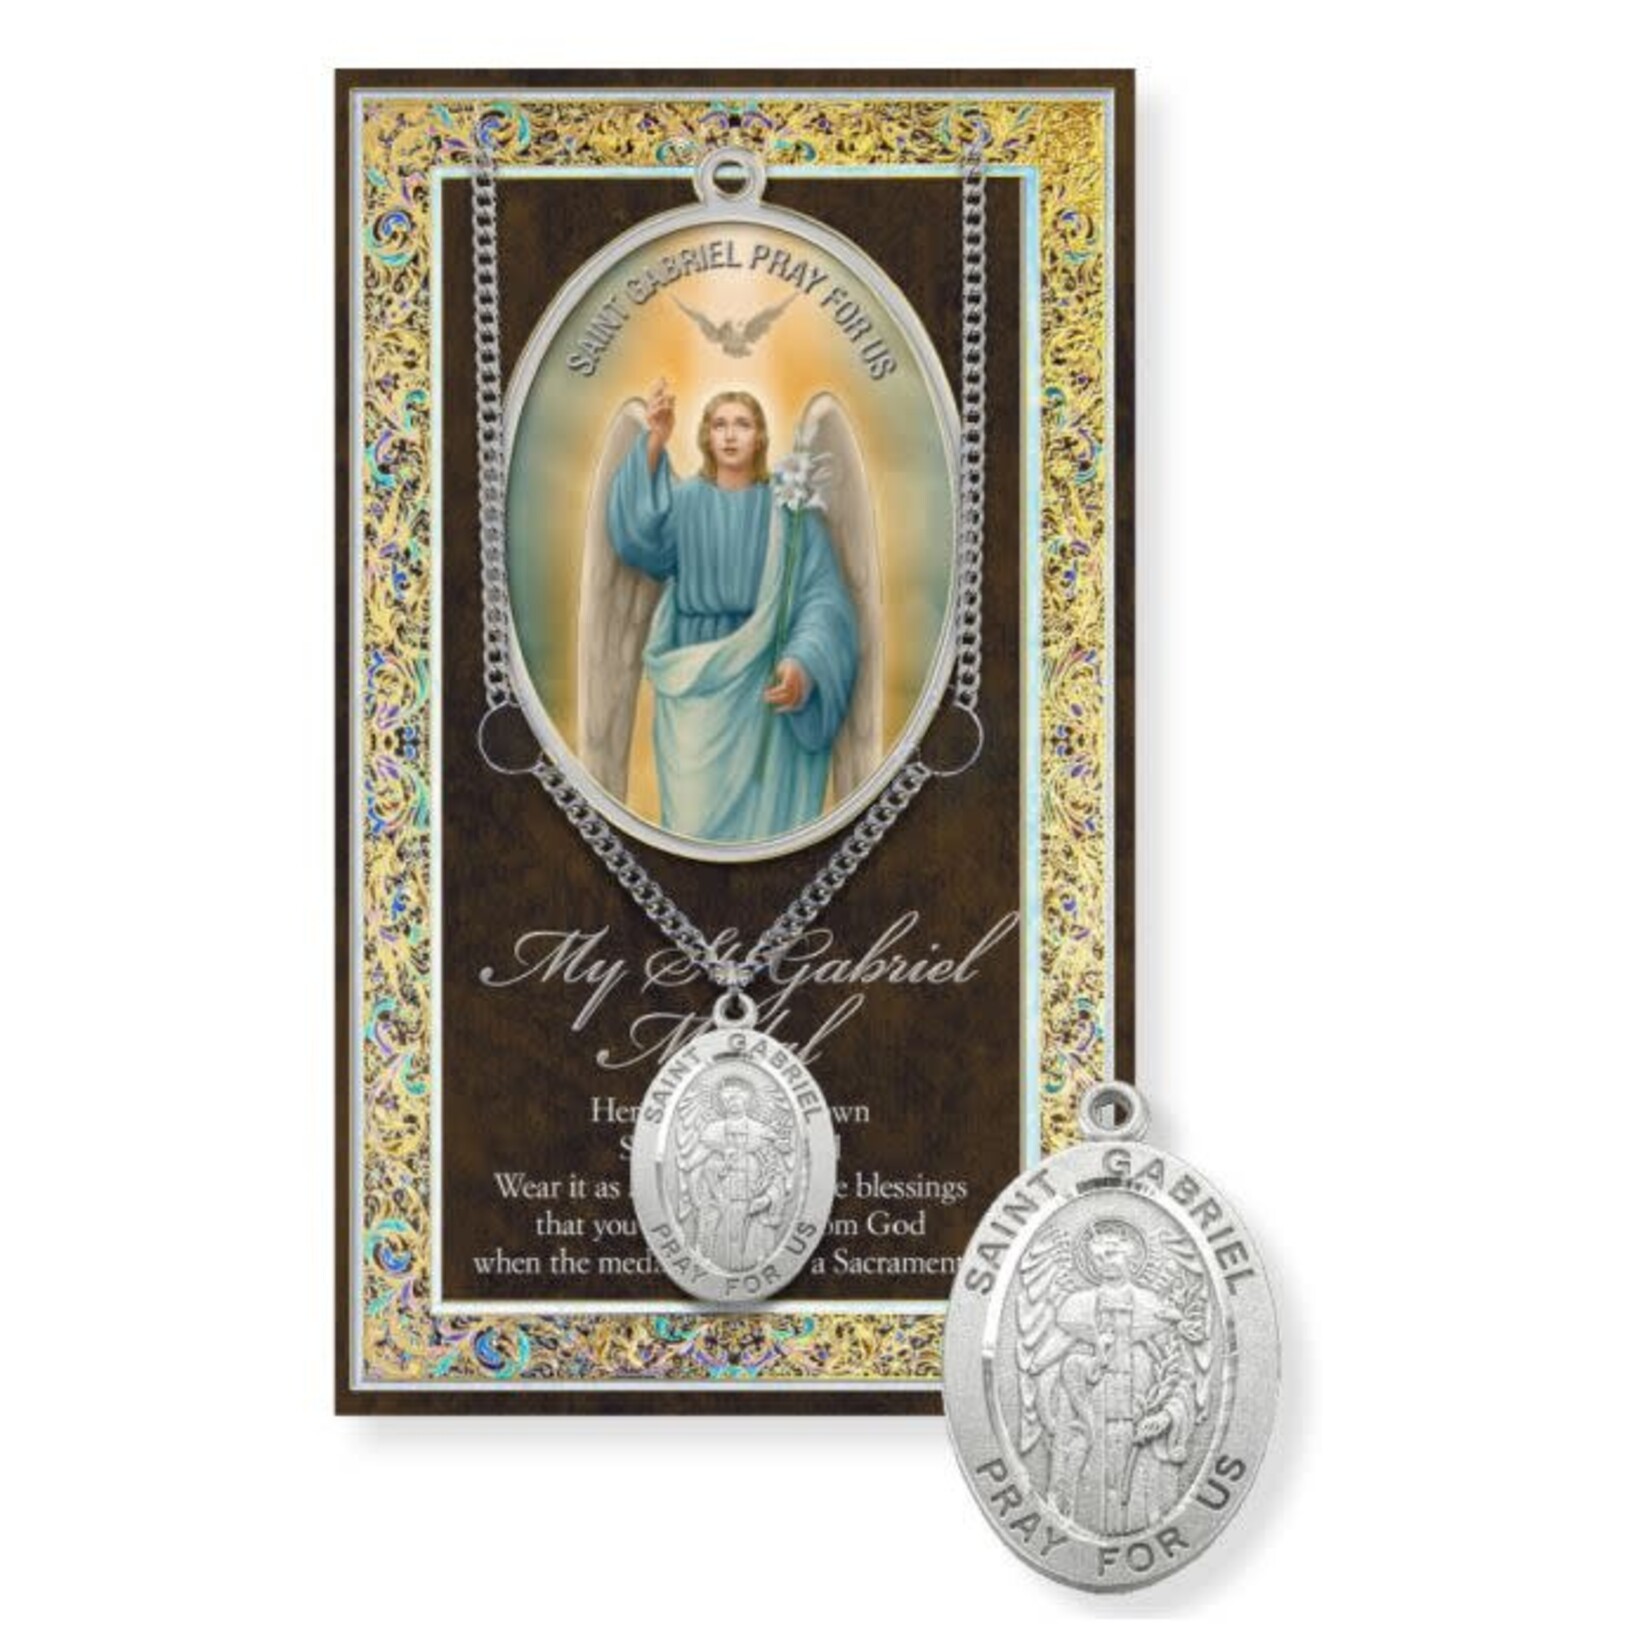 Saint Gabriel Pewter Medal with Booklet